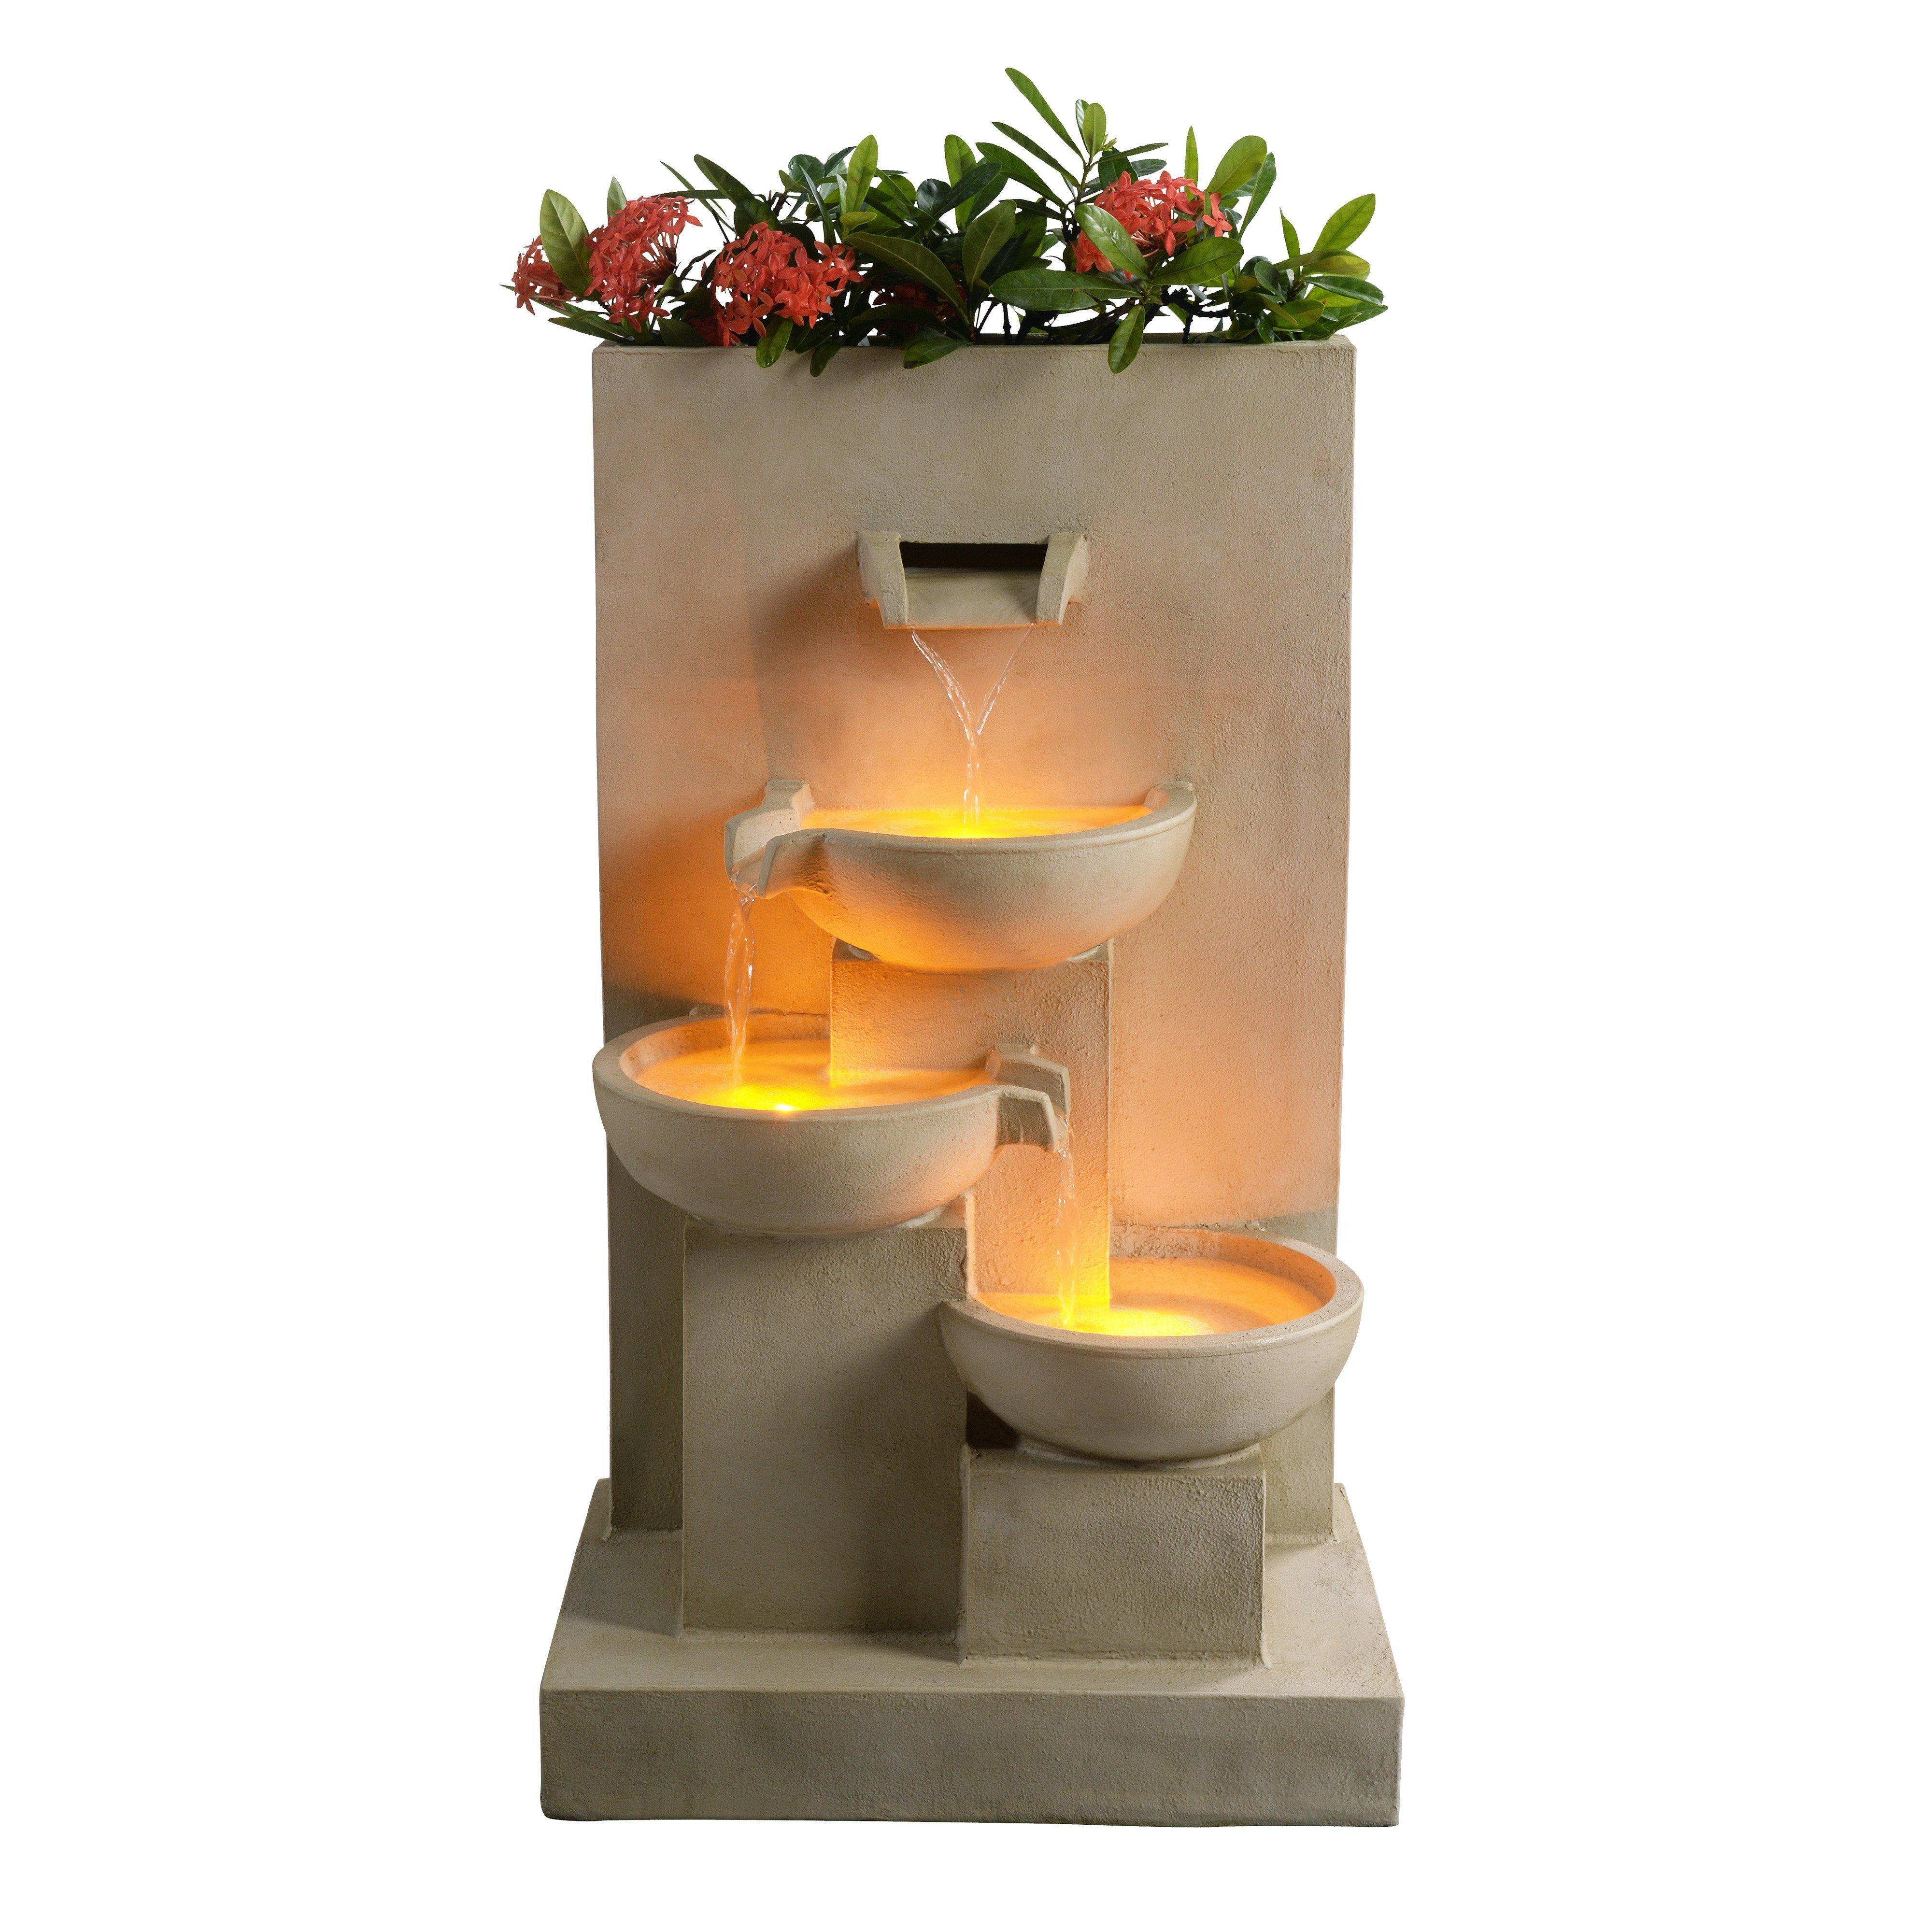 Outdoor Water Fountain with Planter, 74 cm Natural - image 1